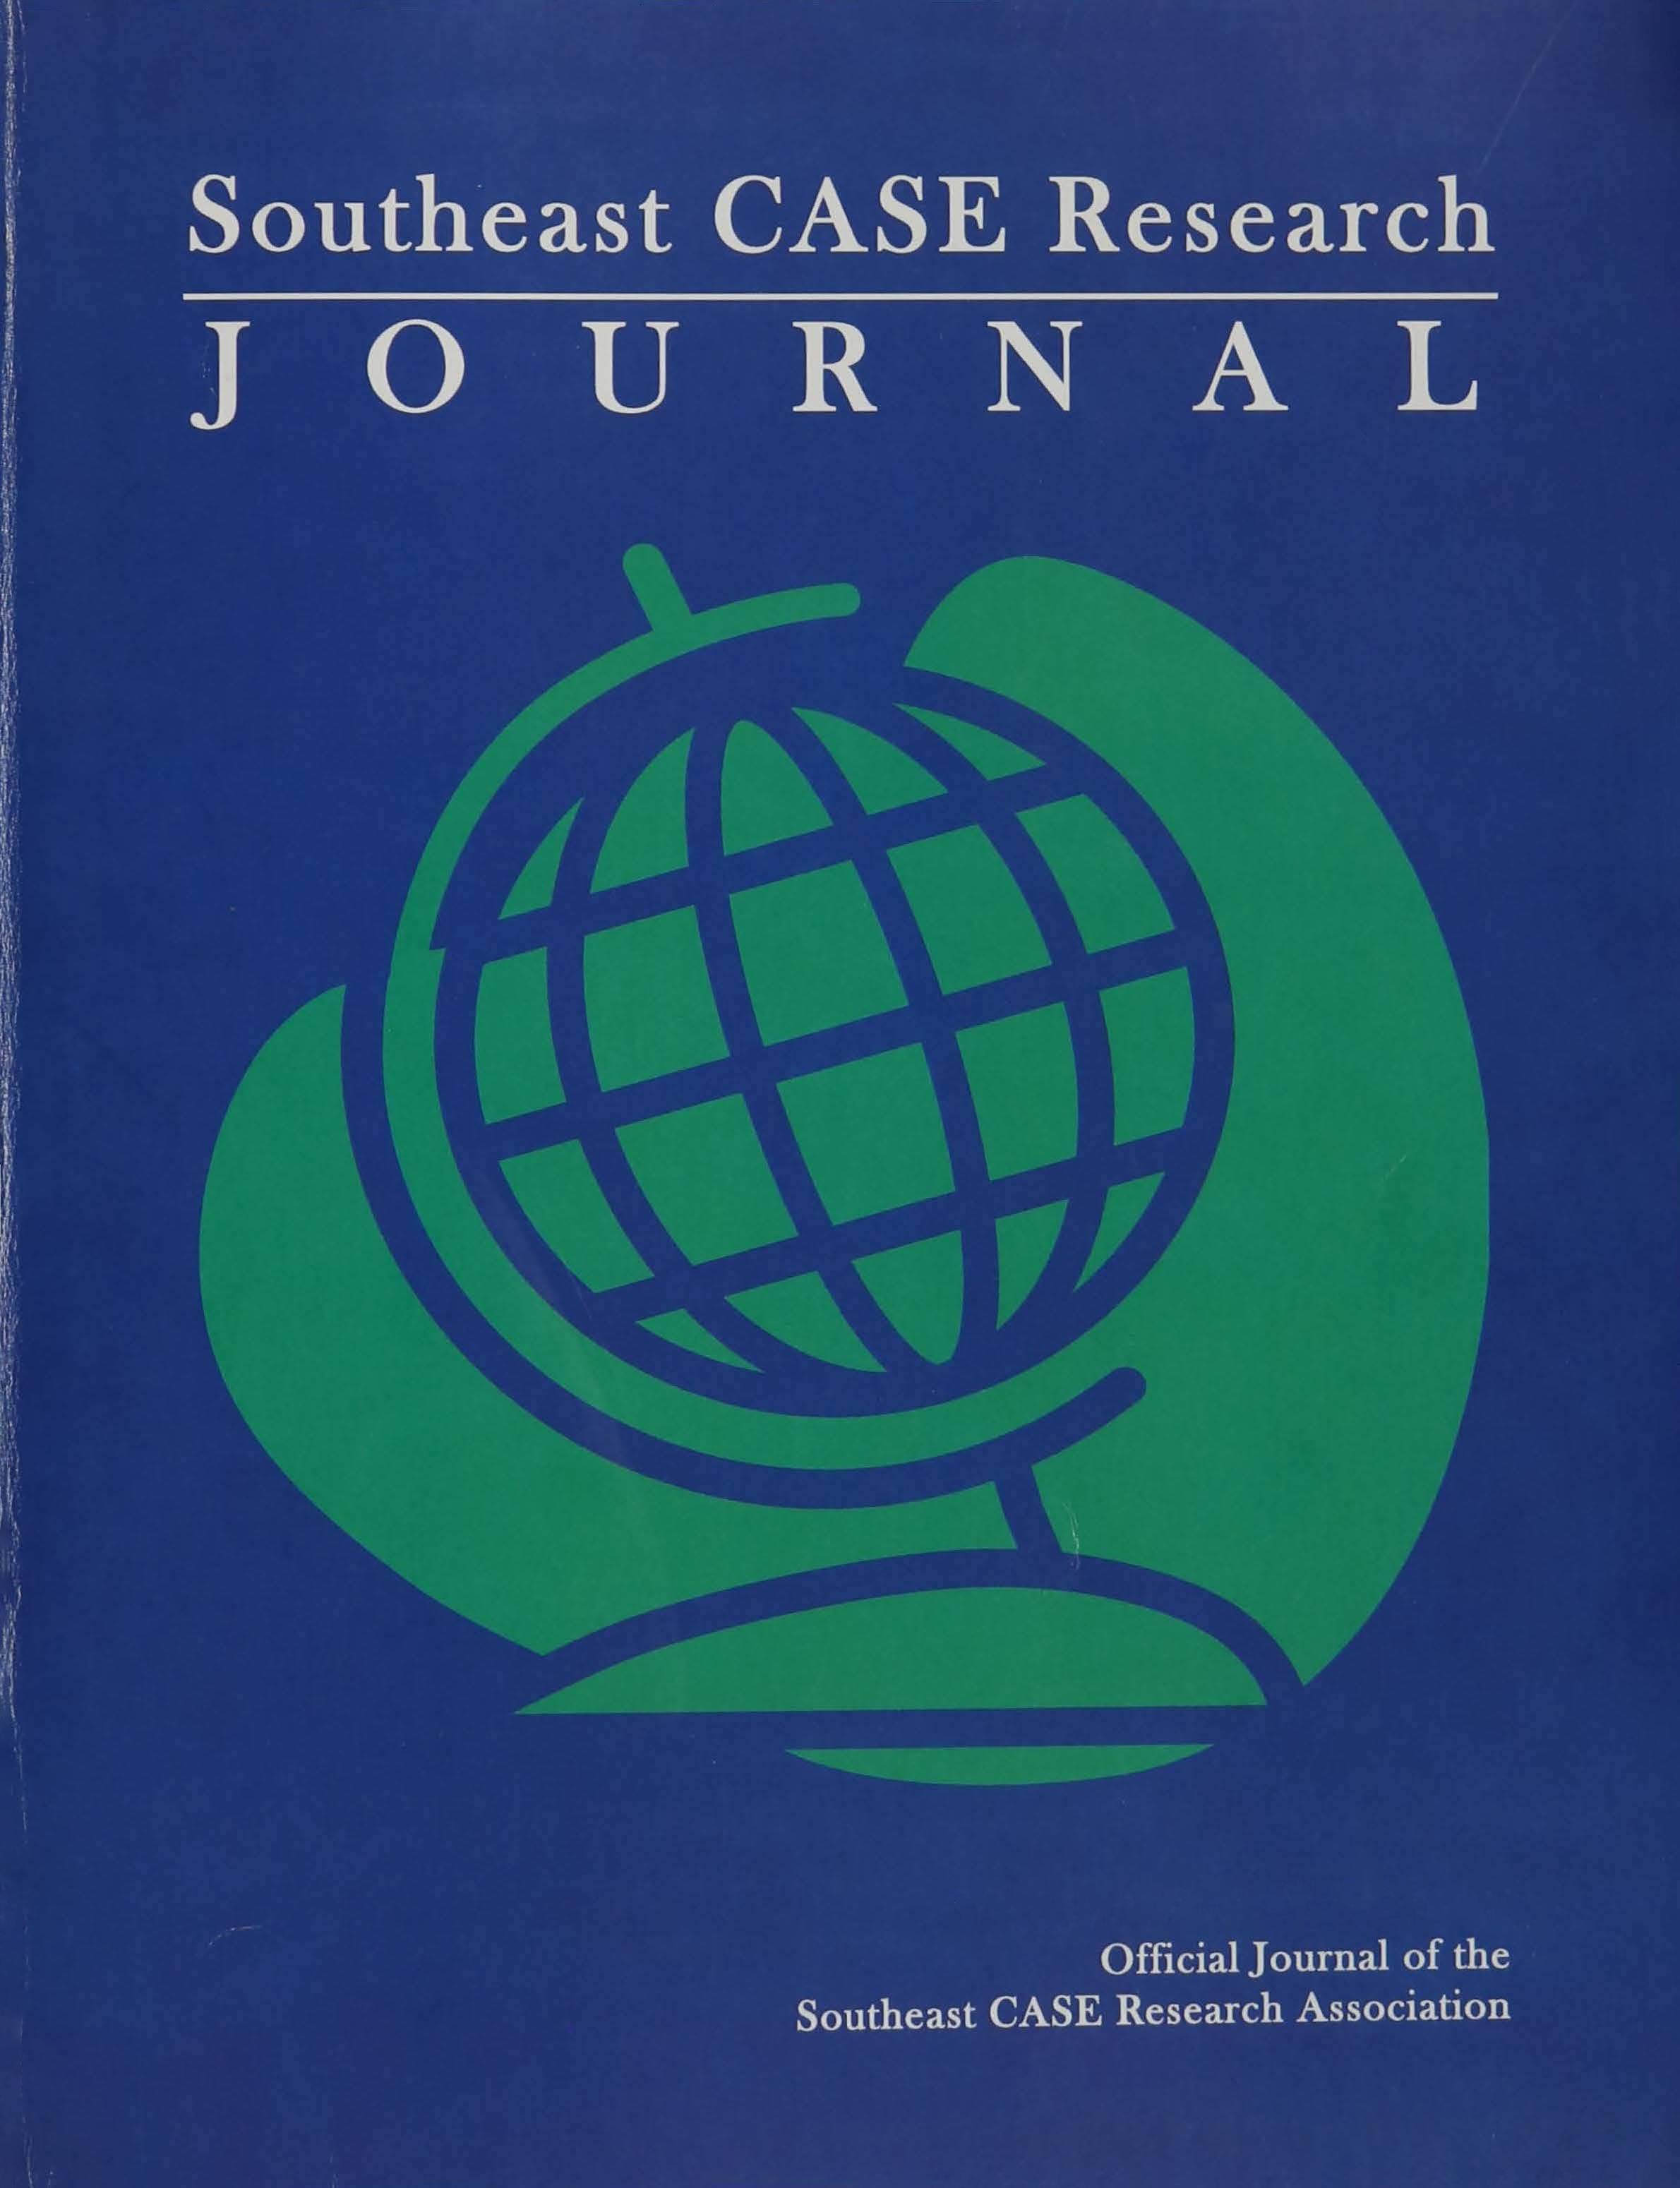 Image of the Journal cover